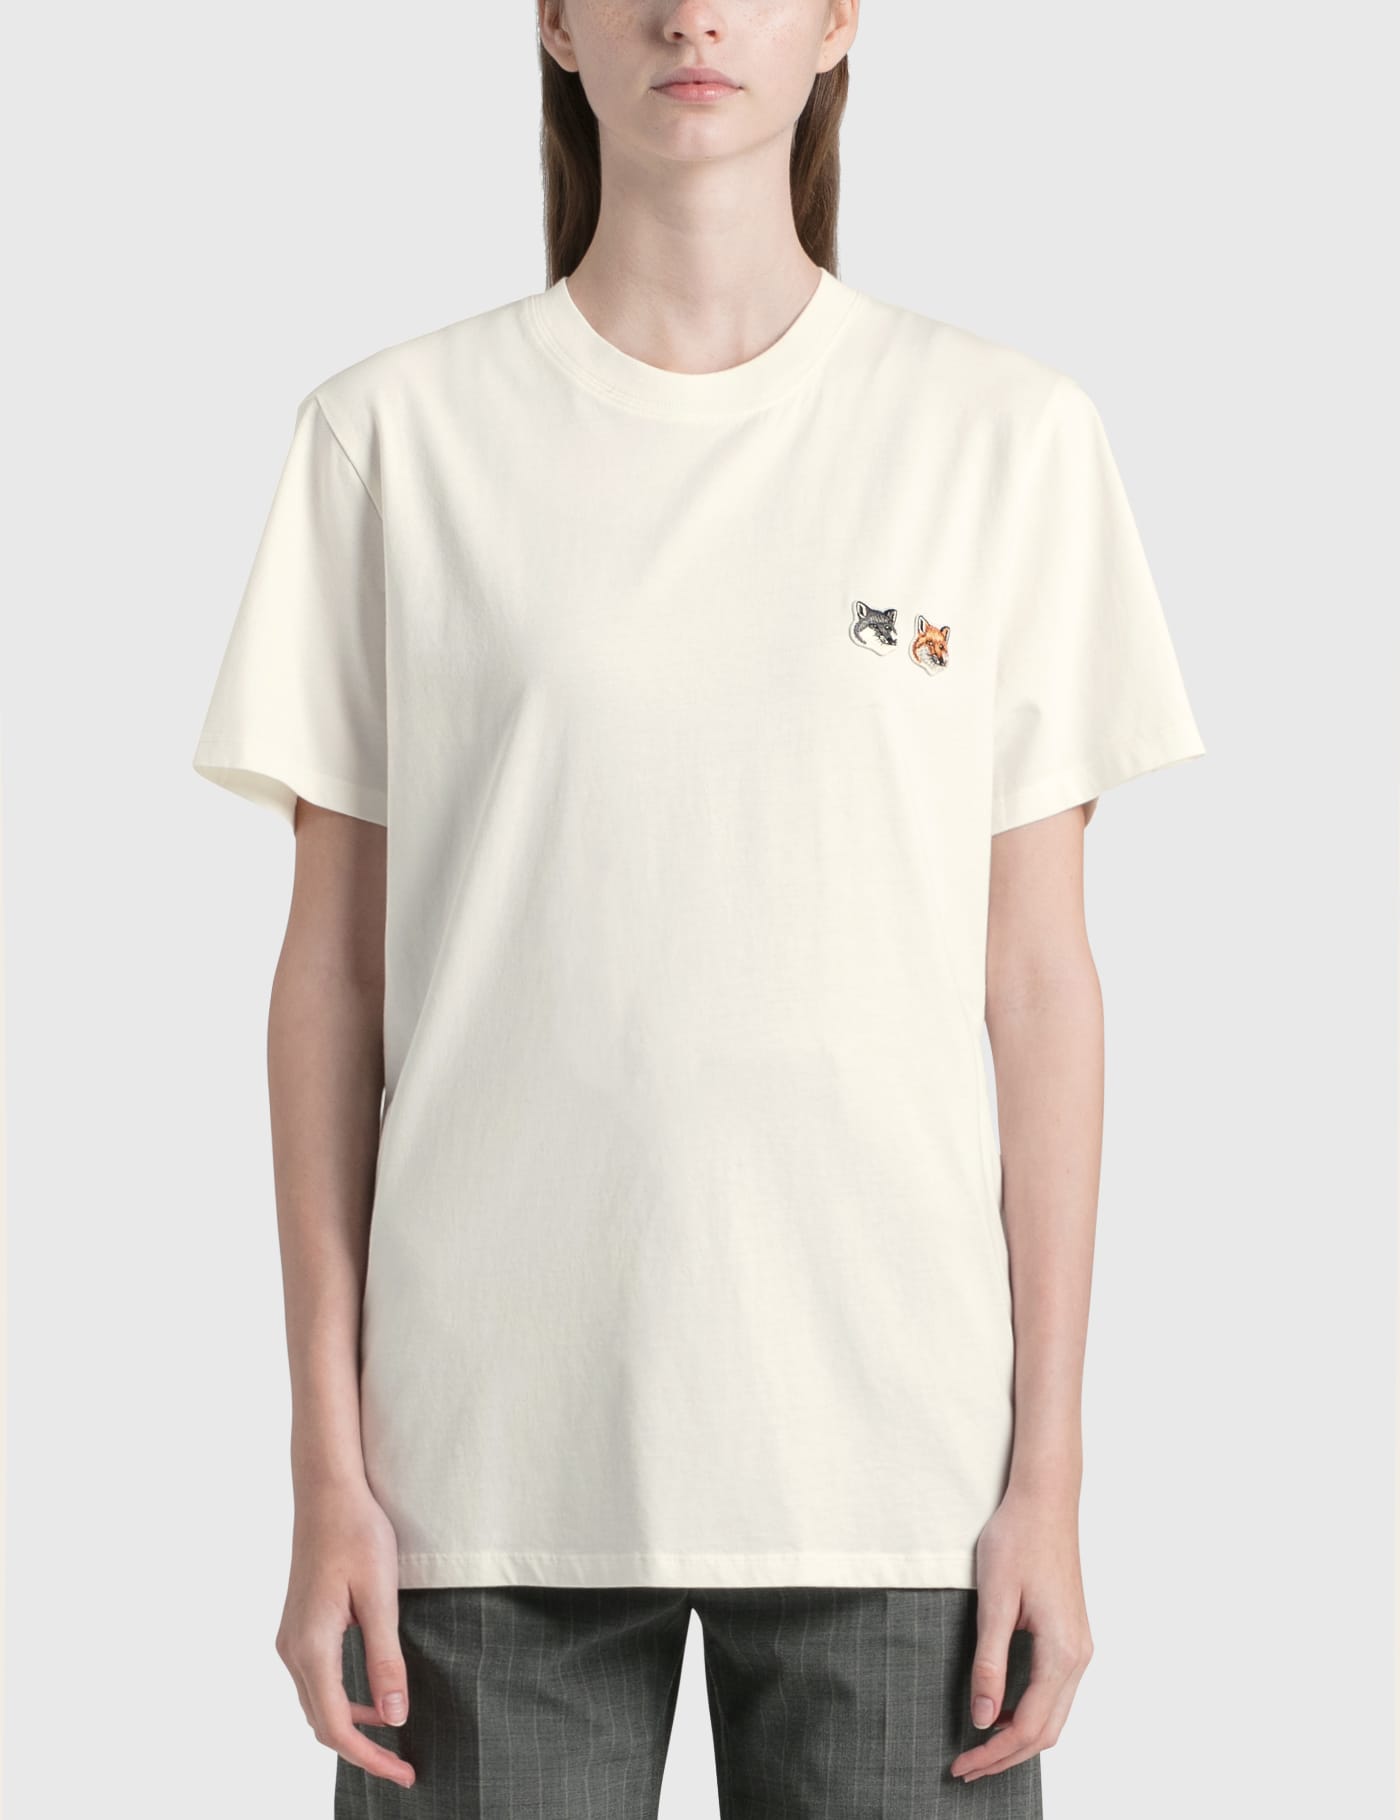 Maison Kitsune - Double Fox Head Patch Classic T-shirt | HBX - Globally  Curated Fashion and Lifestyle by Hypebeast